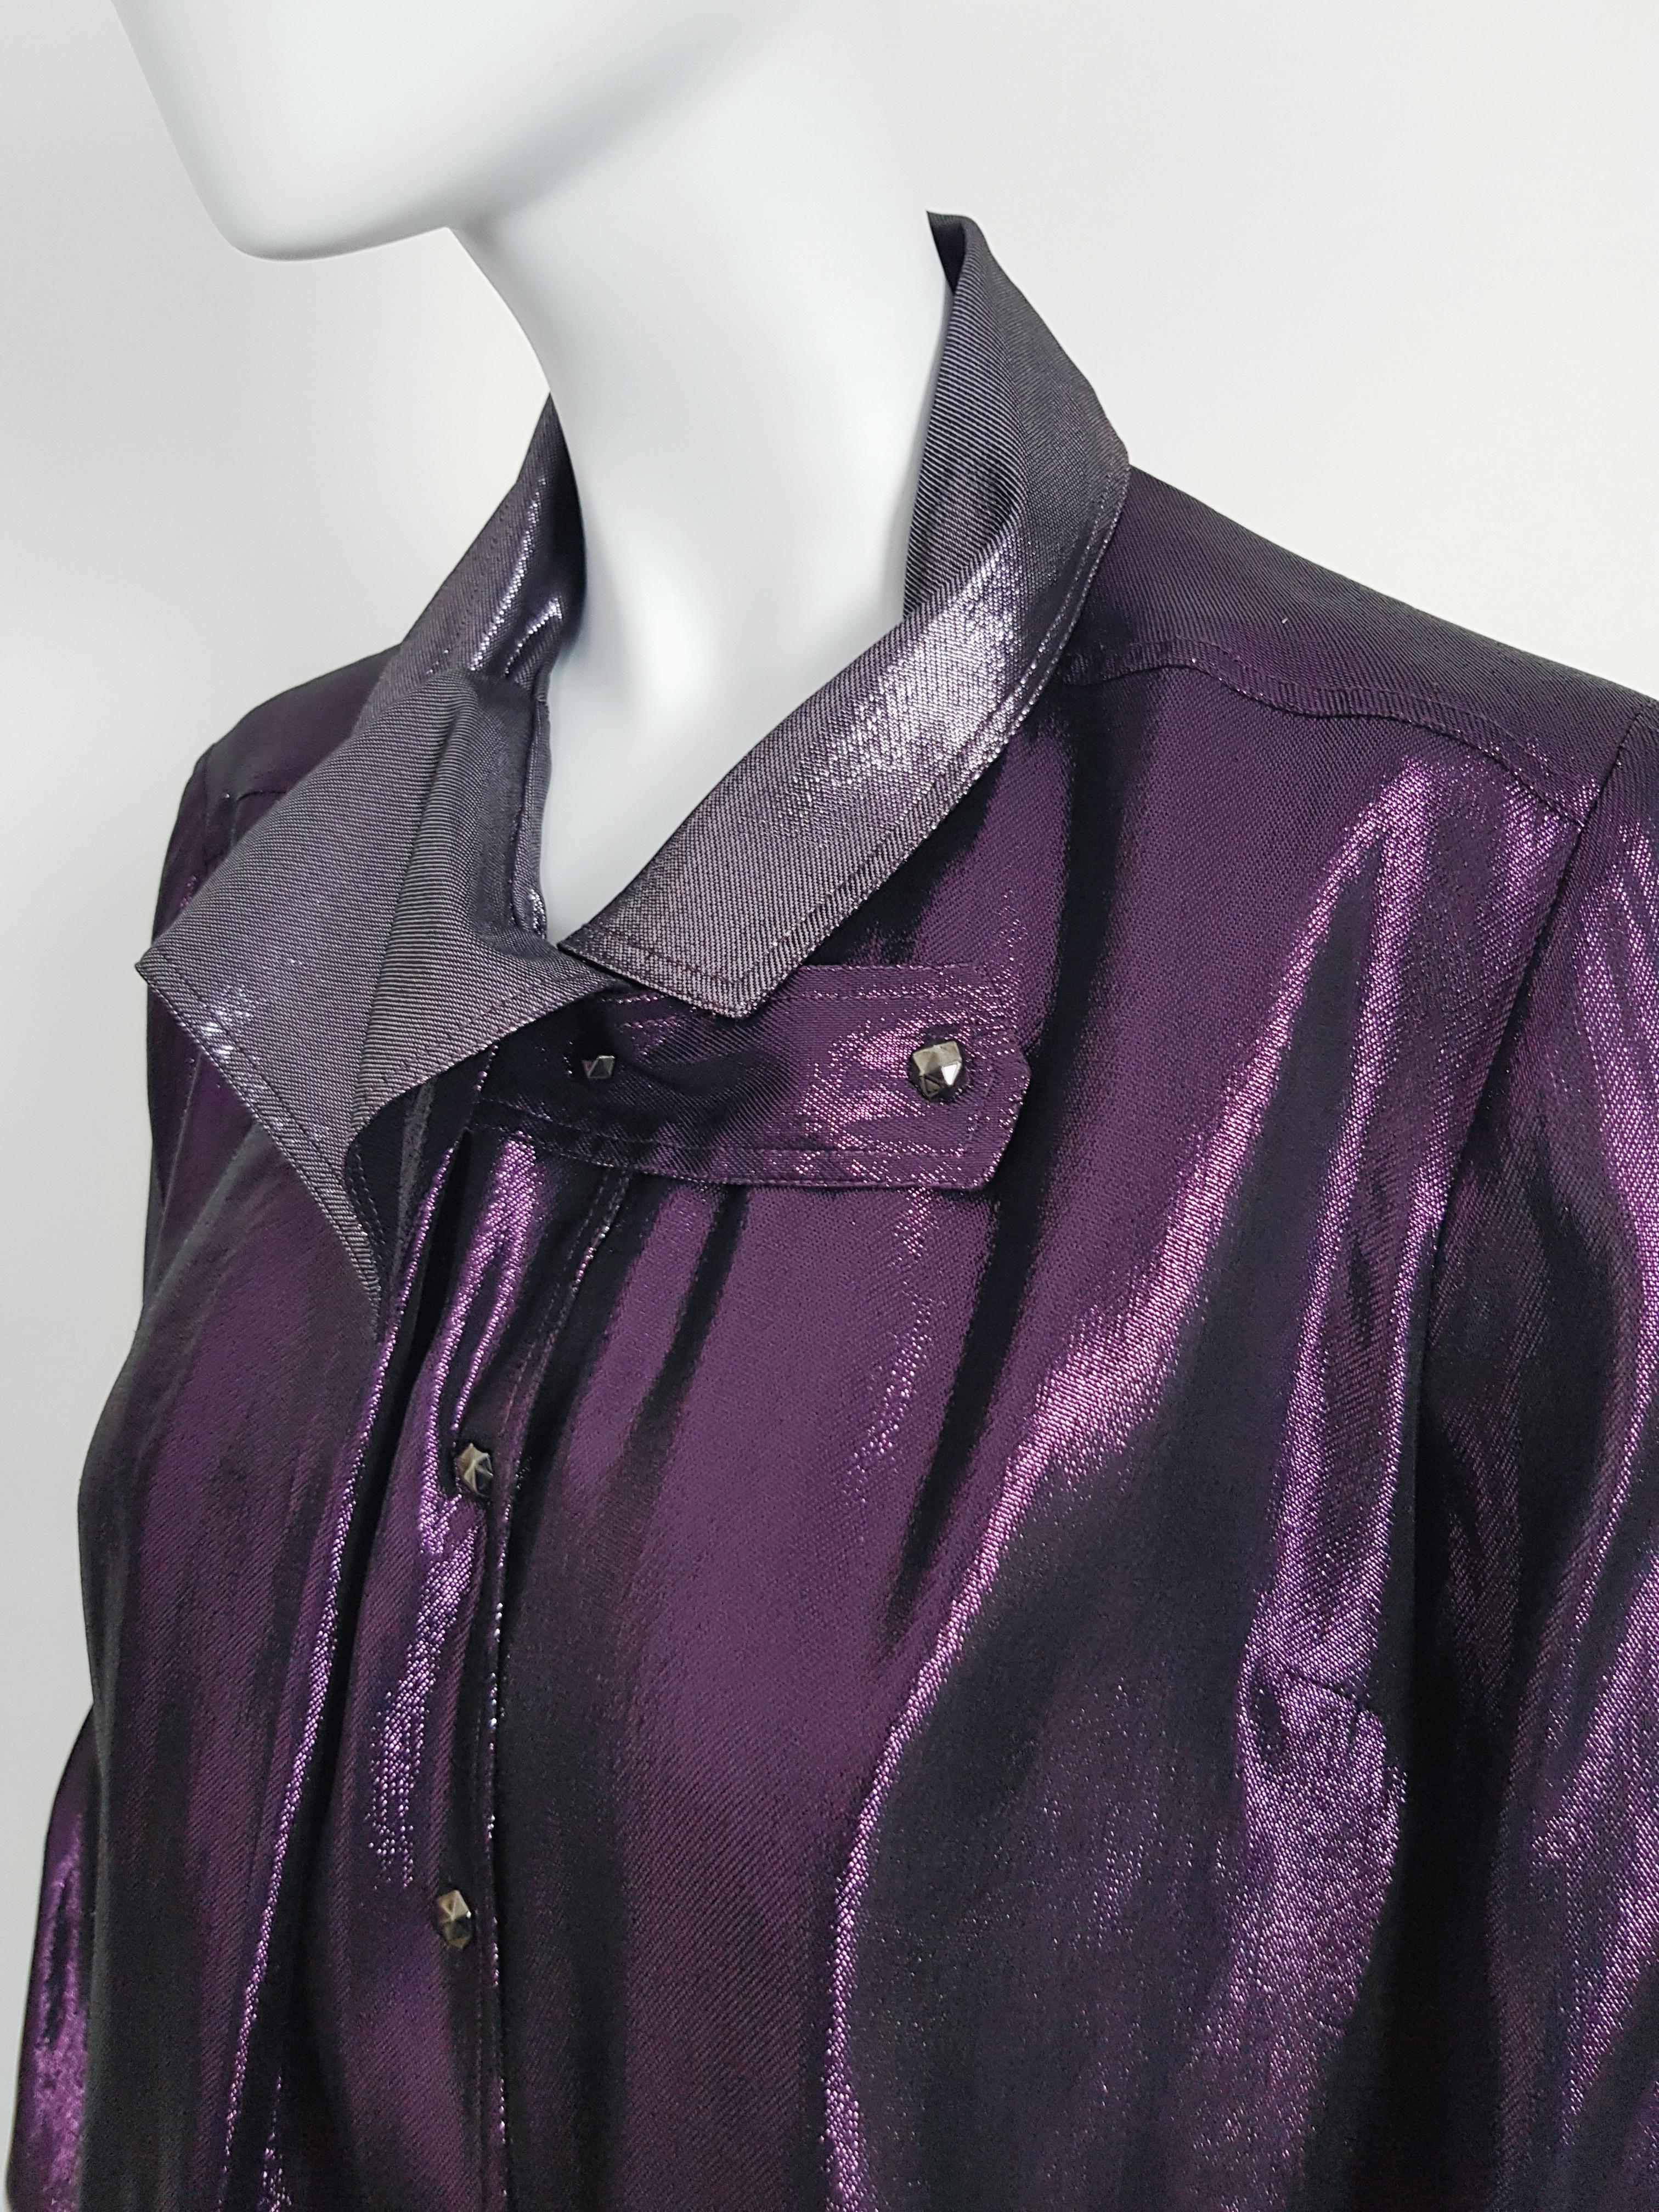 Fabulous silk metallic shirt from Gucci Fall 2009 RTW Collection designed by Frida Giannini

-Metallic fabric double effect in grey and purple
-Closed by metallic snap buttons
-Special collar
-64% Silk / 36% Polyester
-Made in Italy
-Estimated size: